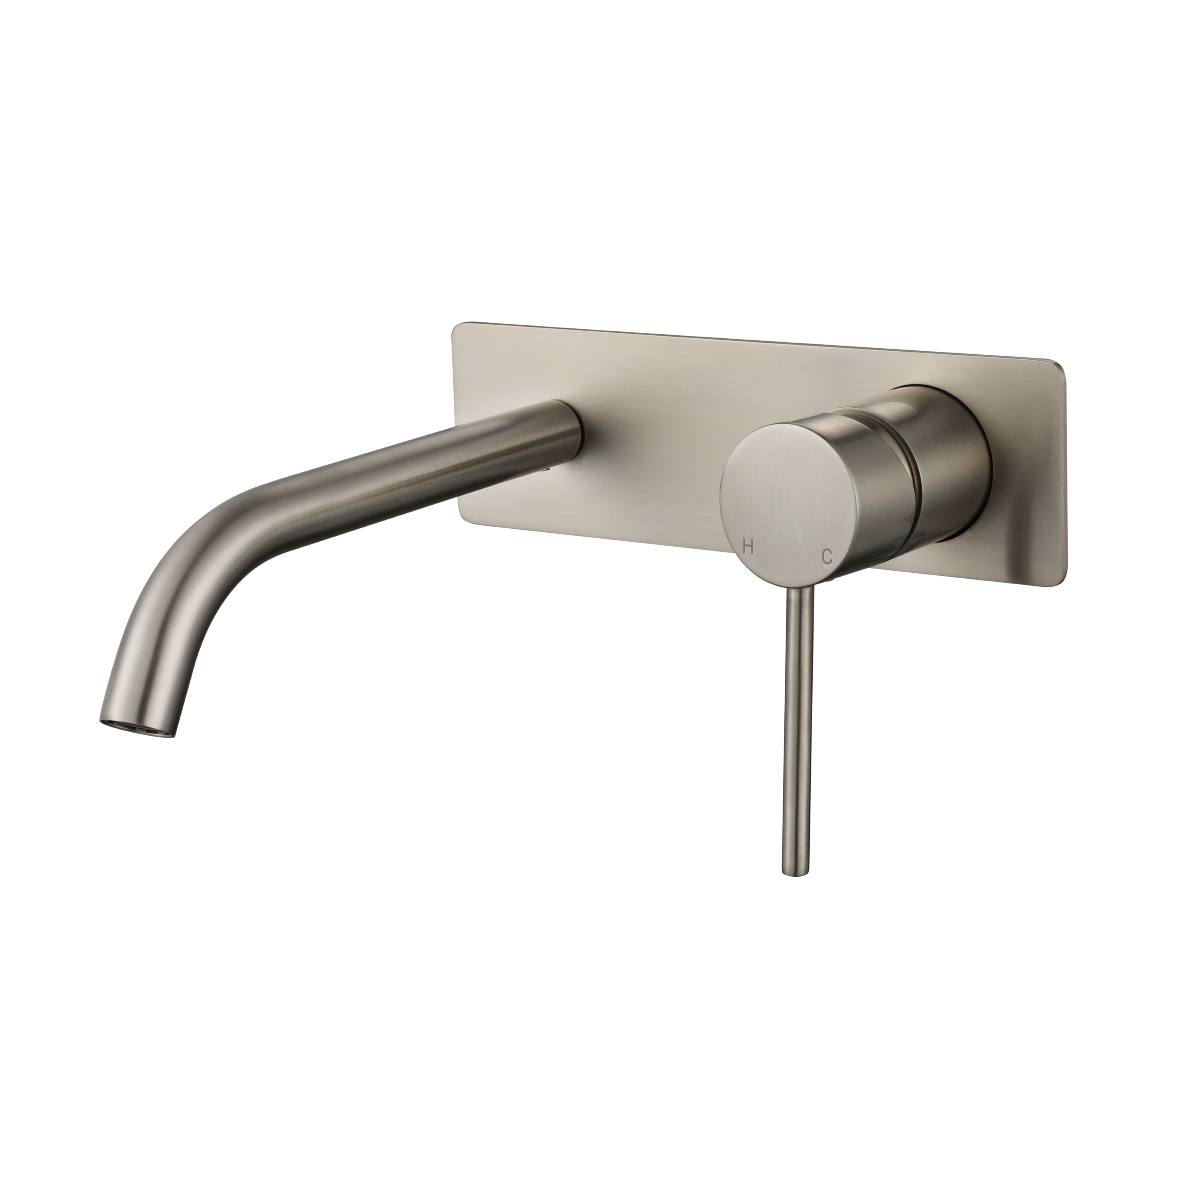 Star Mini Wall Mixer & Spout Combination Brushed Nickel